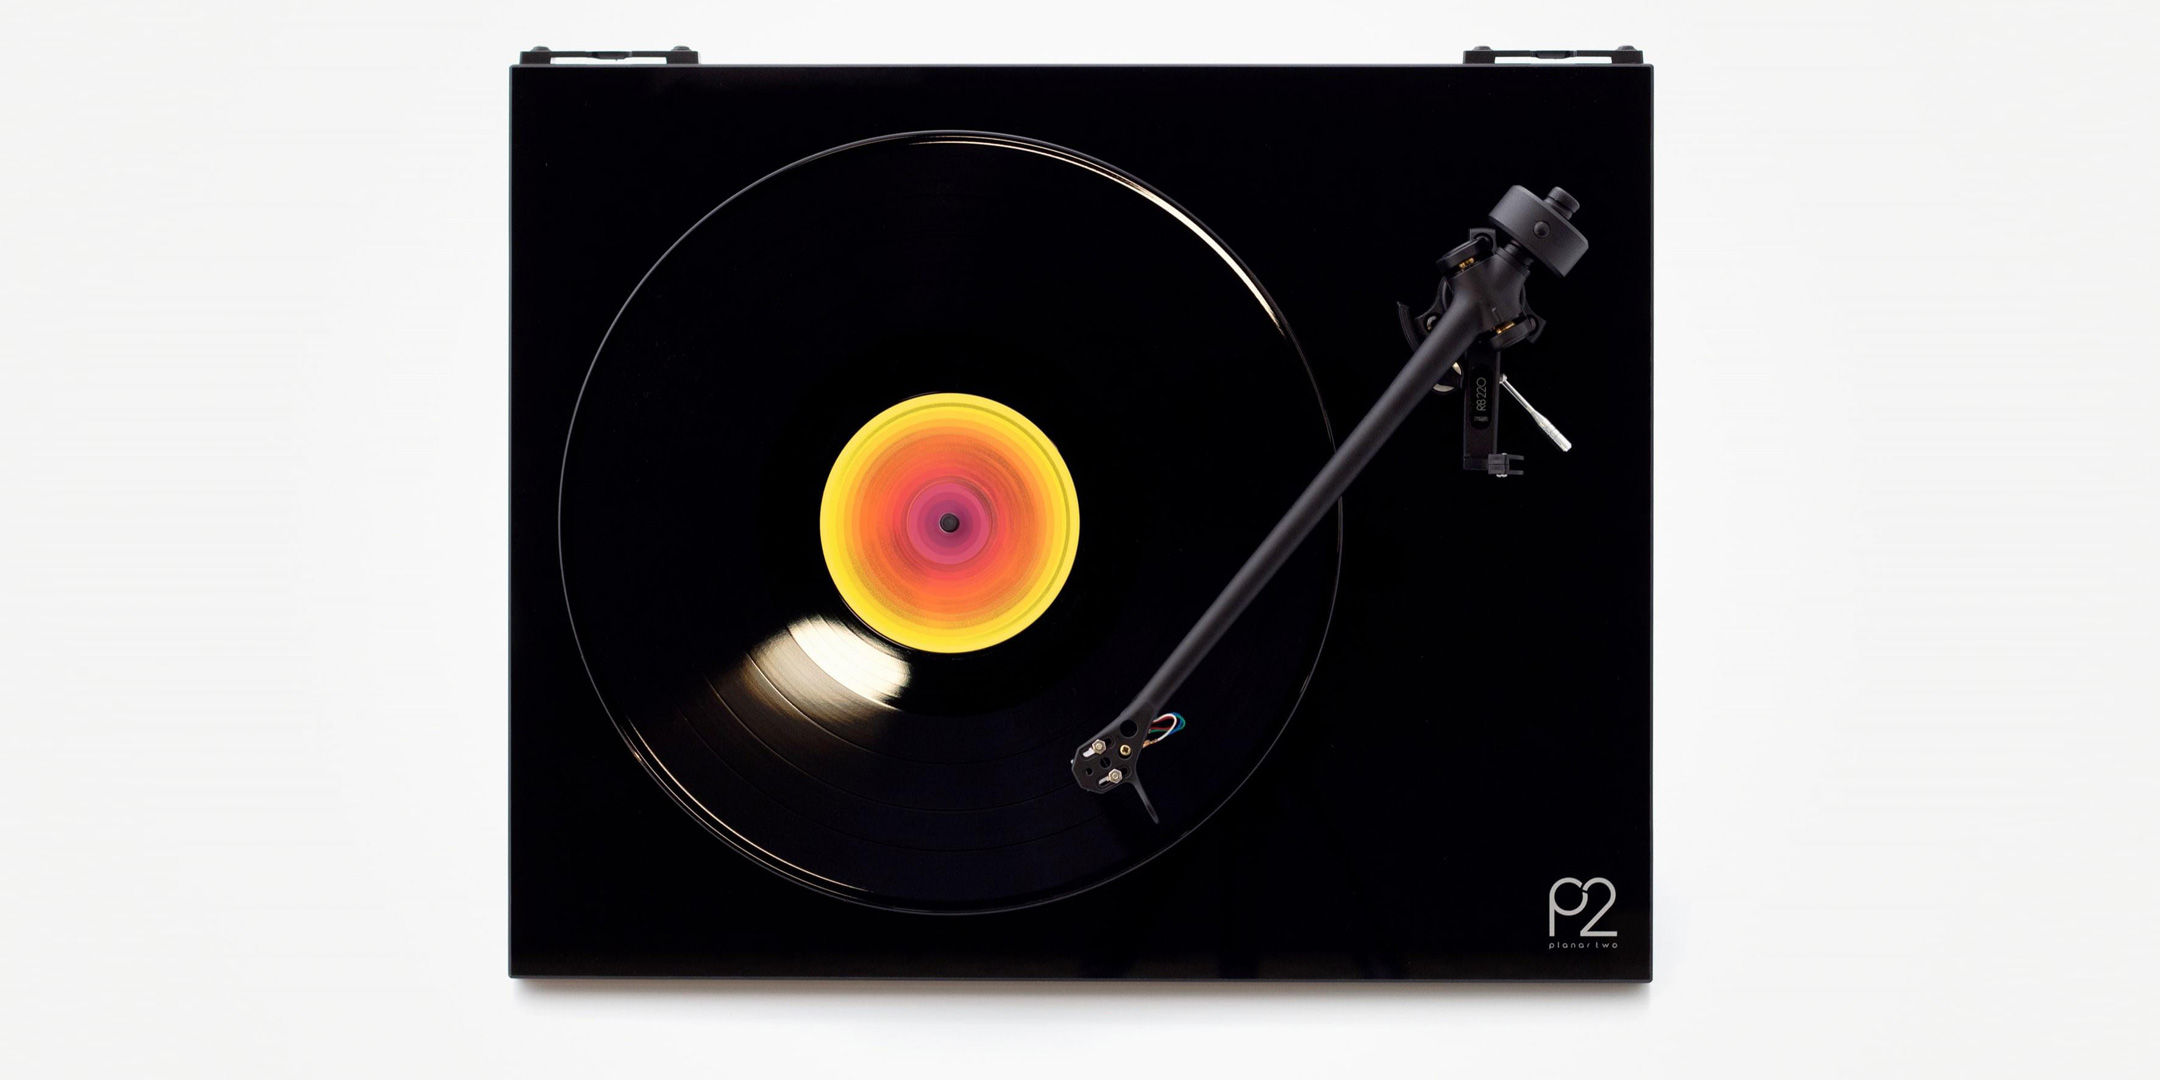 Pic showing a black Rega Planar 2 Turntable from the top